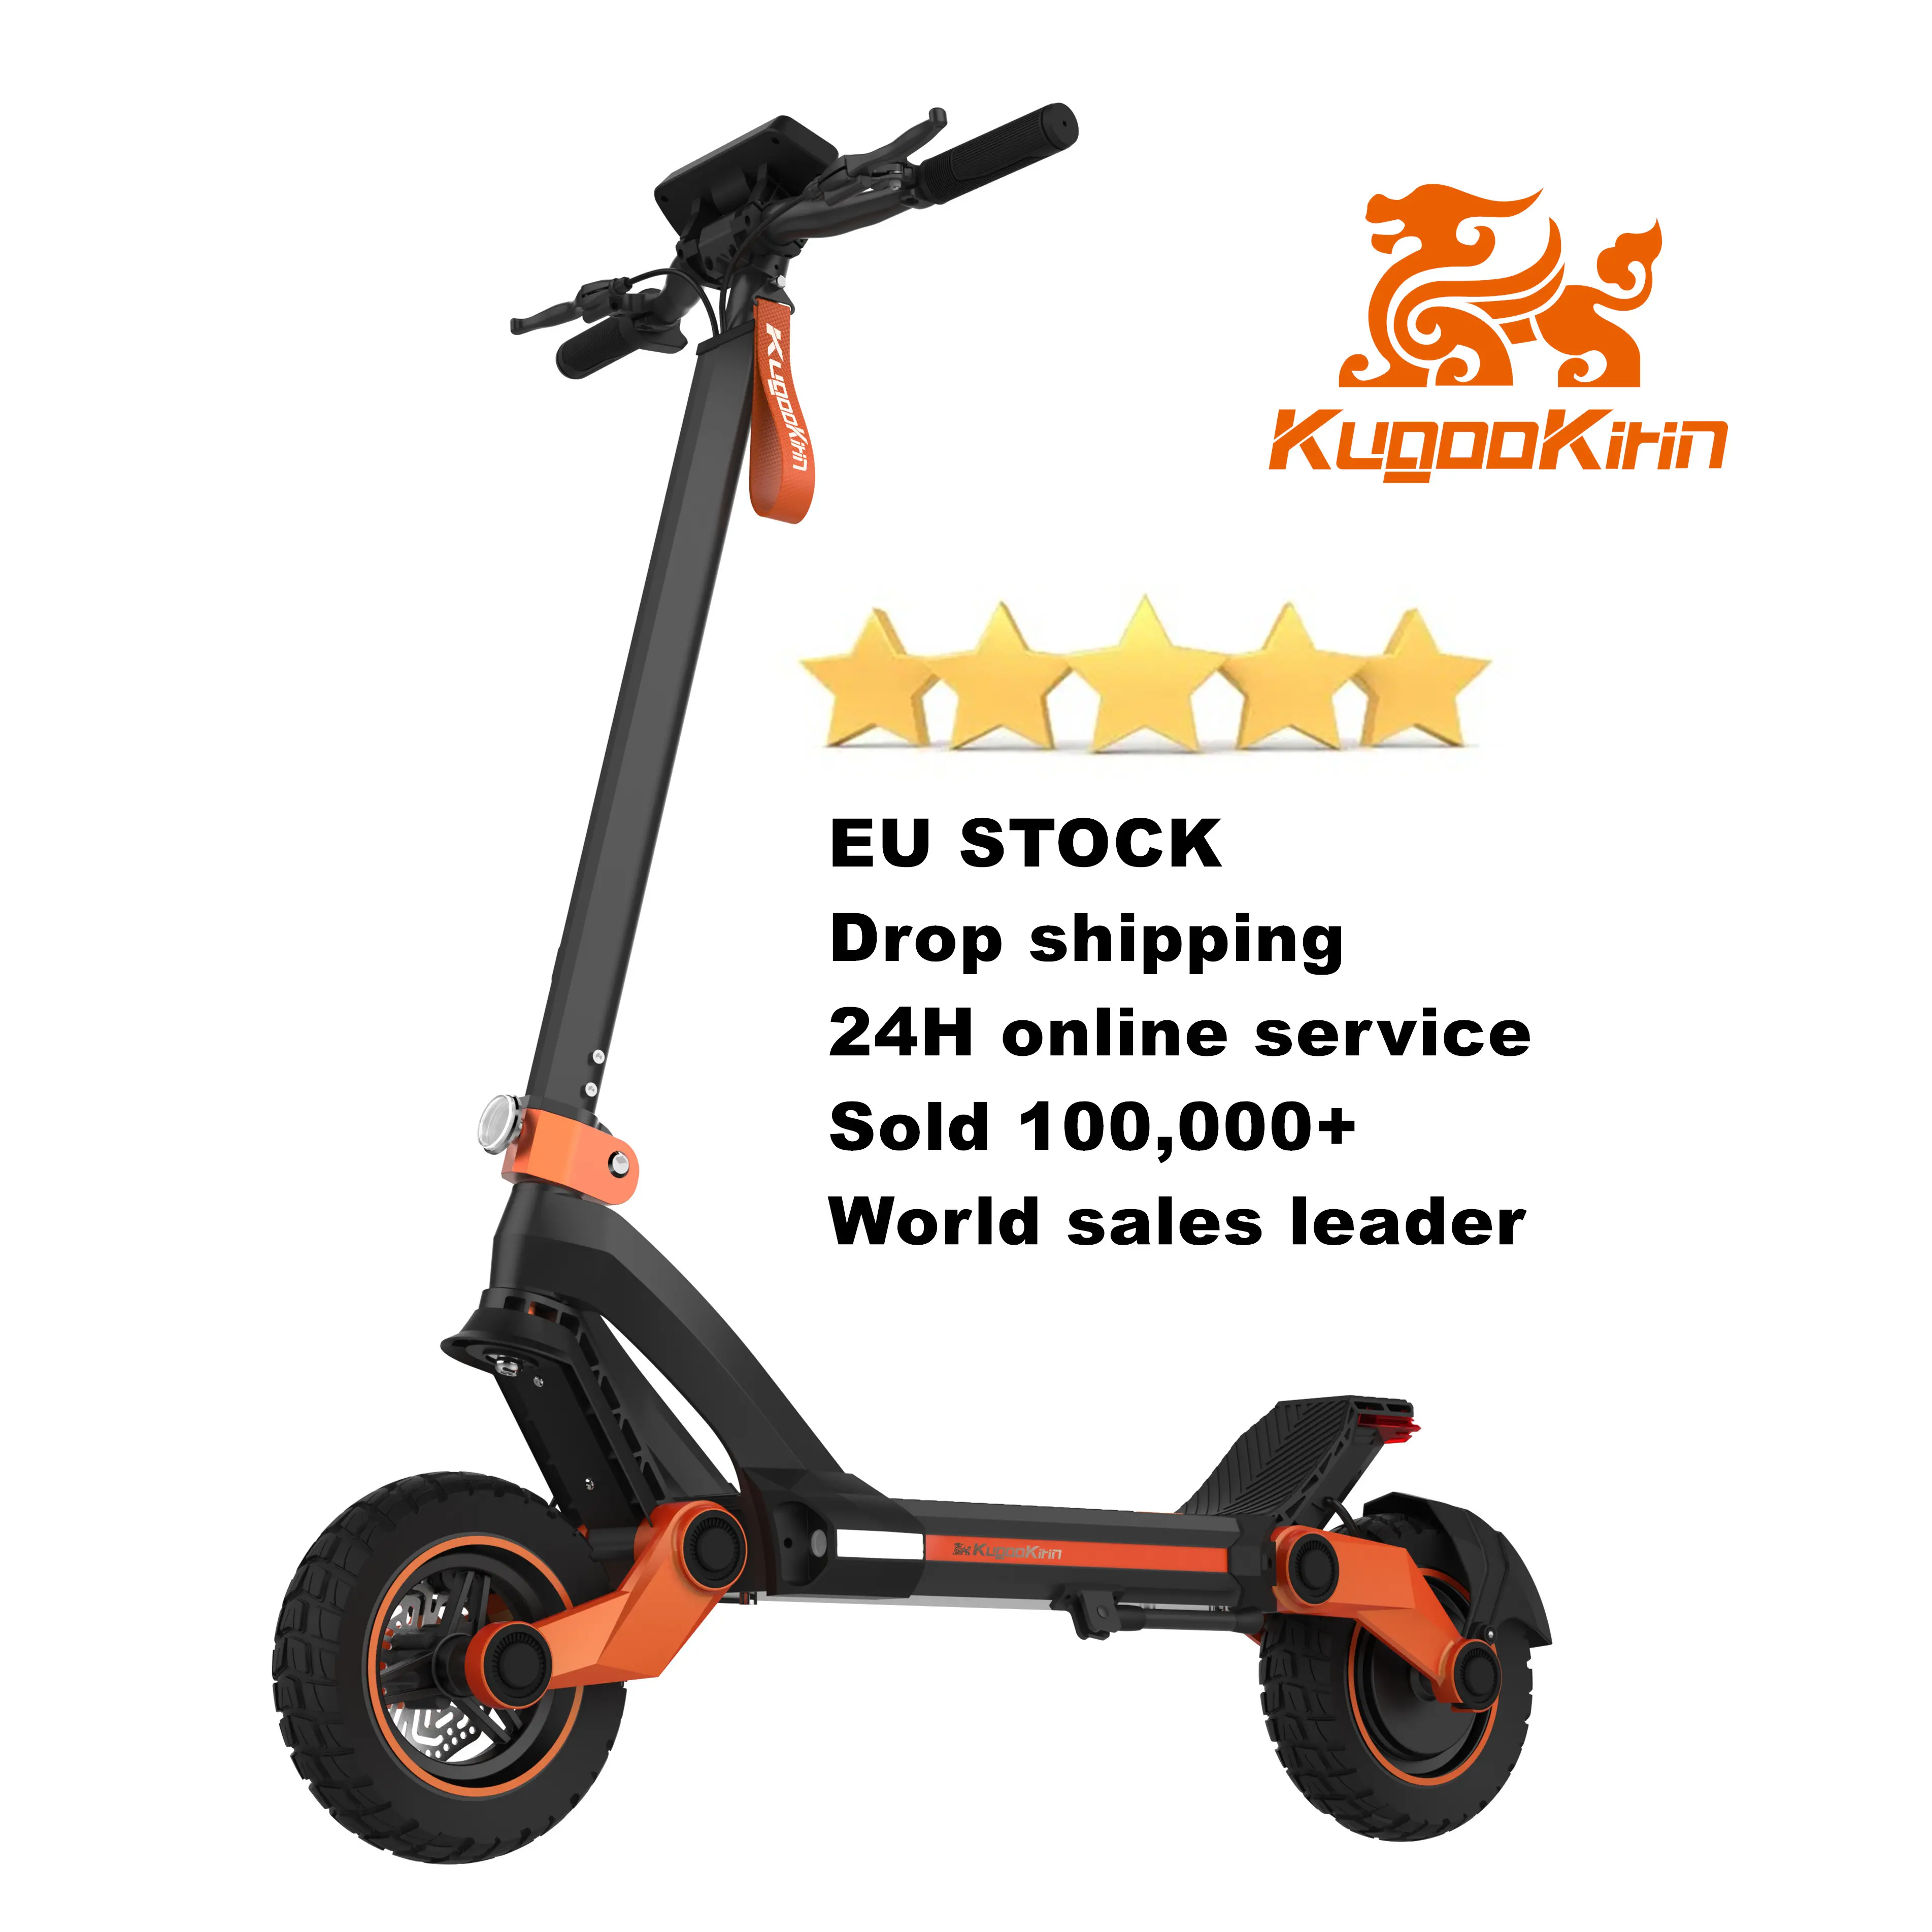 Kugoo Kirin G3 Two Wheel Double Motor High Performance Scooter Electric Chinese Made Adult 1200W Electric Scooter